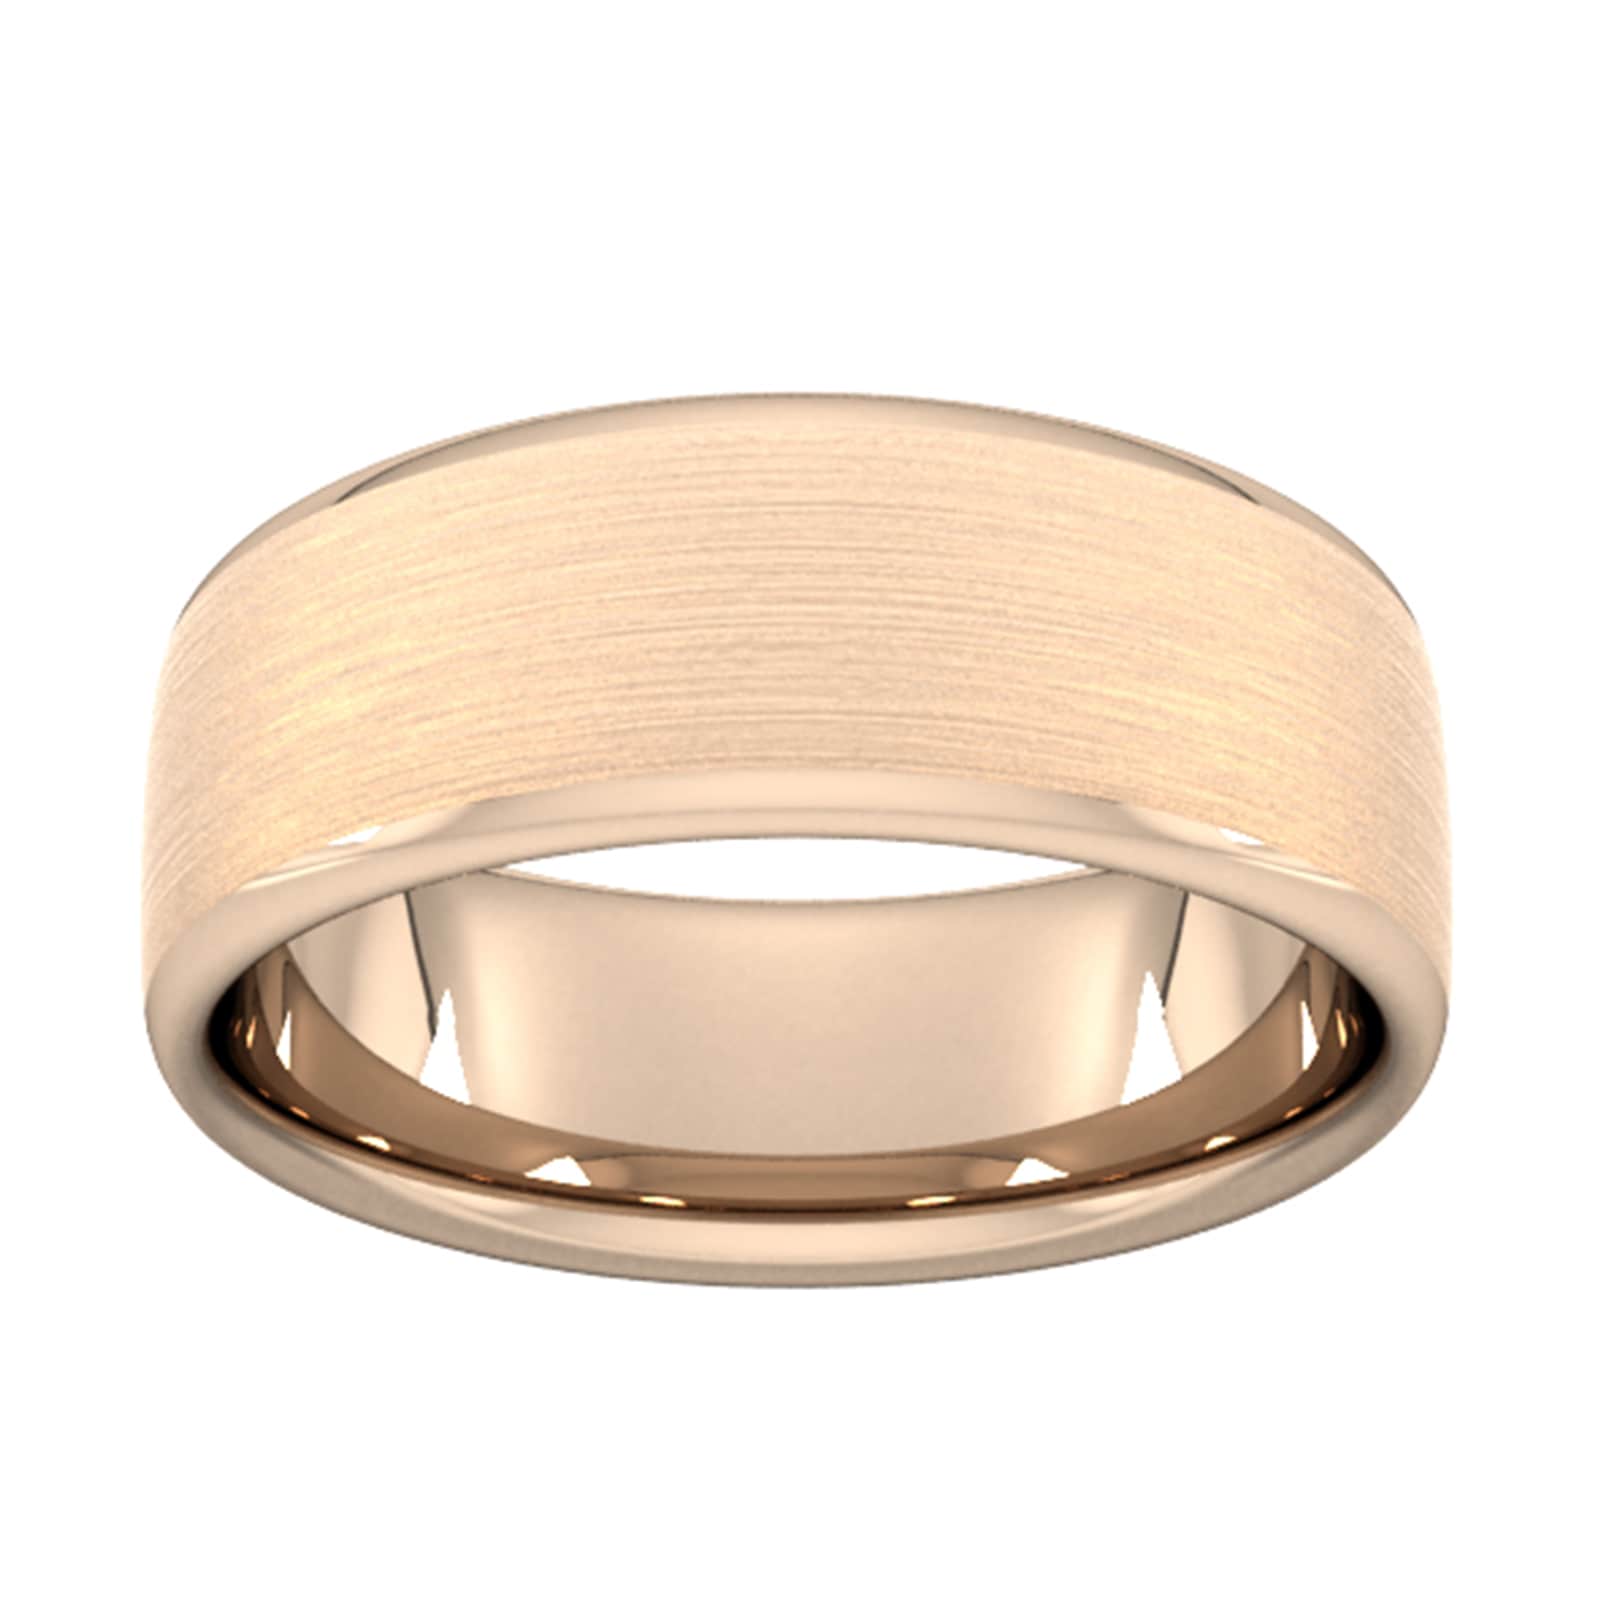 8mm Flat Court Heavy Matt Finished Wedding Ring In 9 Carat Rose Gold - Ring Size H